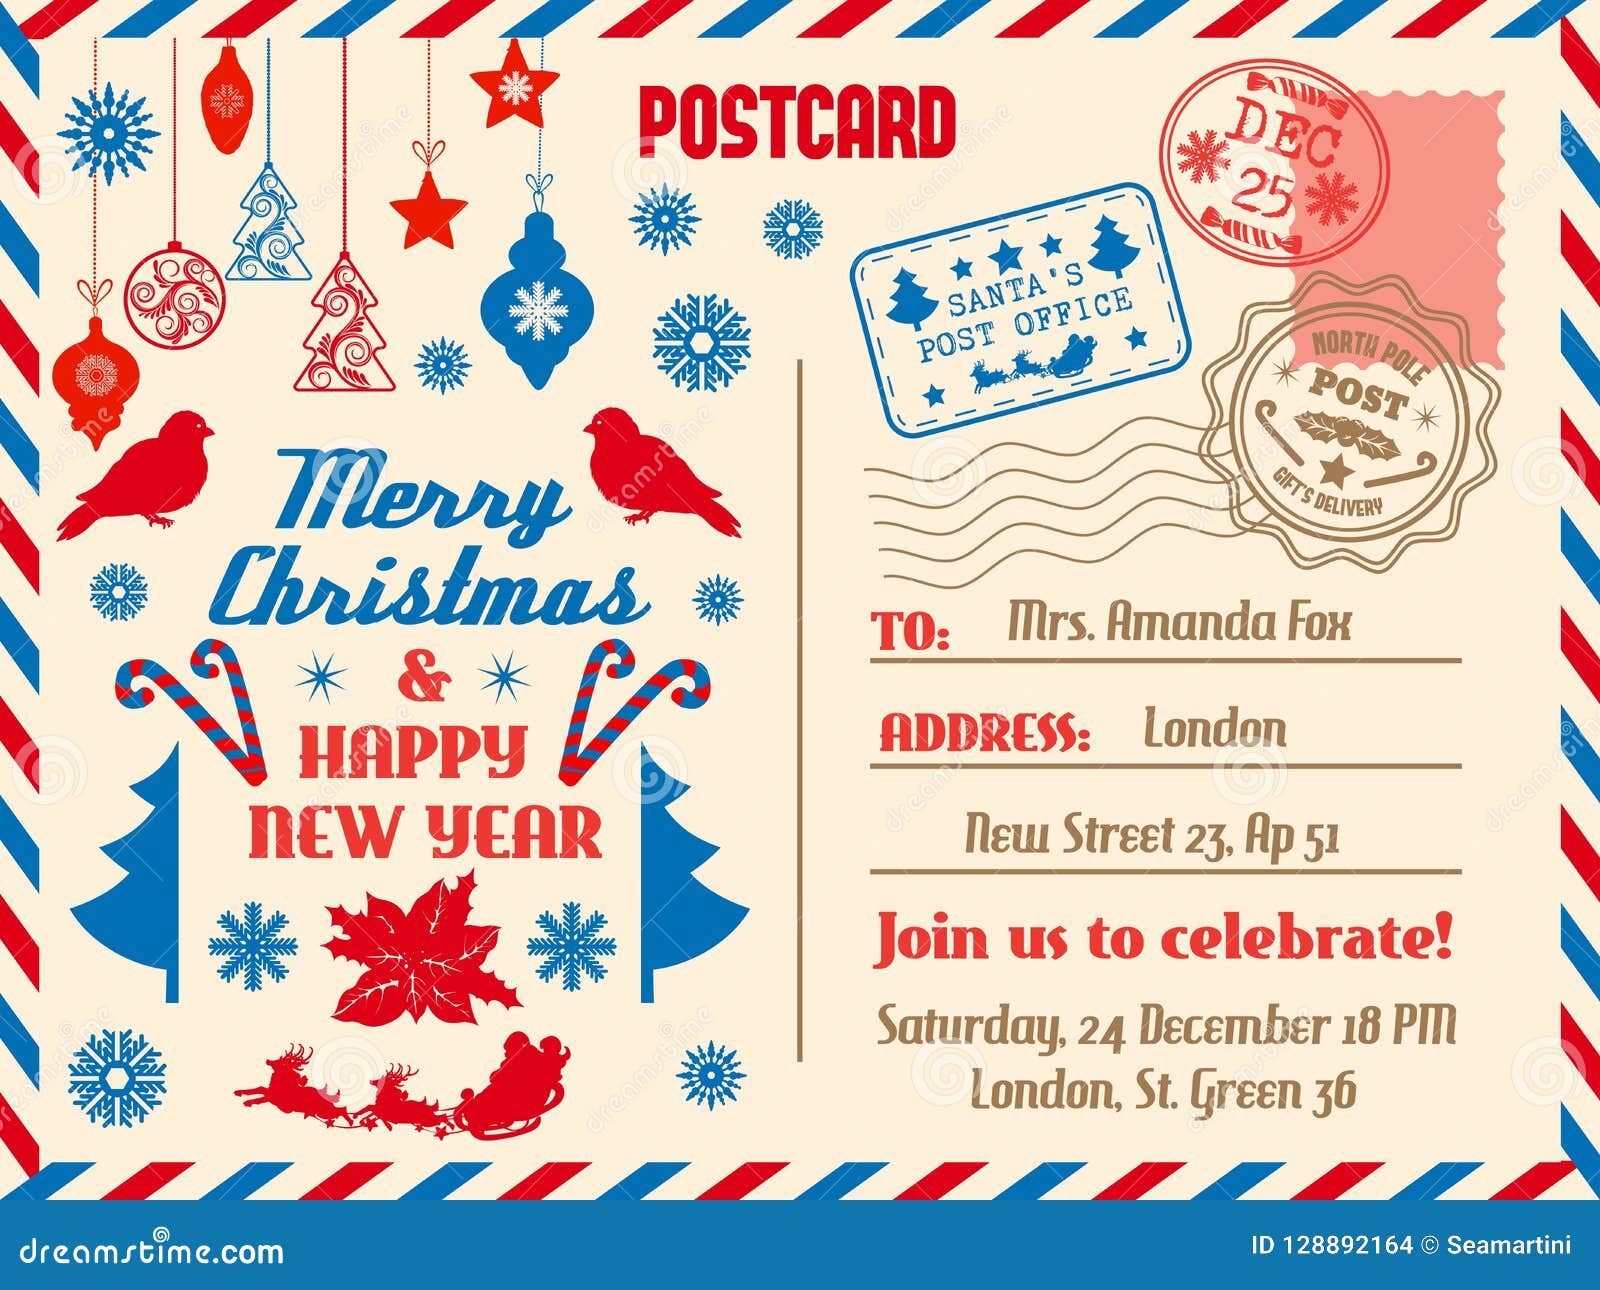 Merry Christmas Postcard, Holiday Vector Stock Vector - Illustration of ...